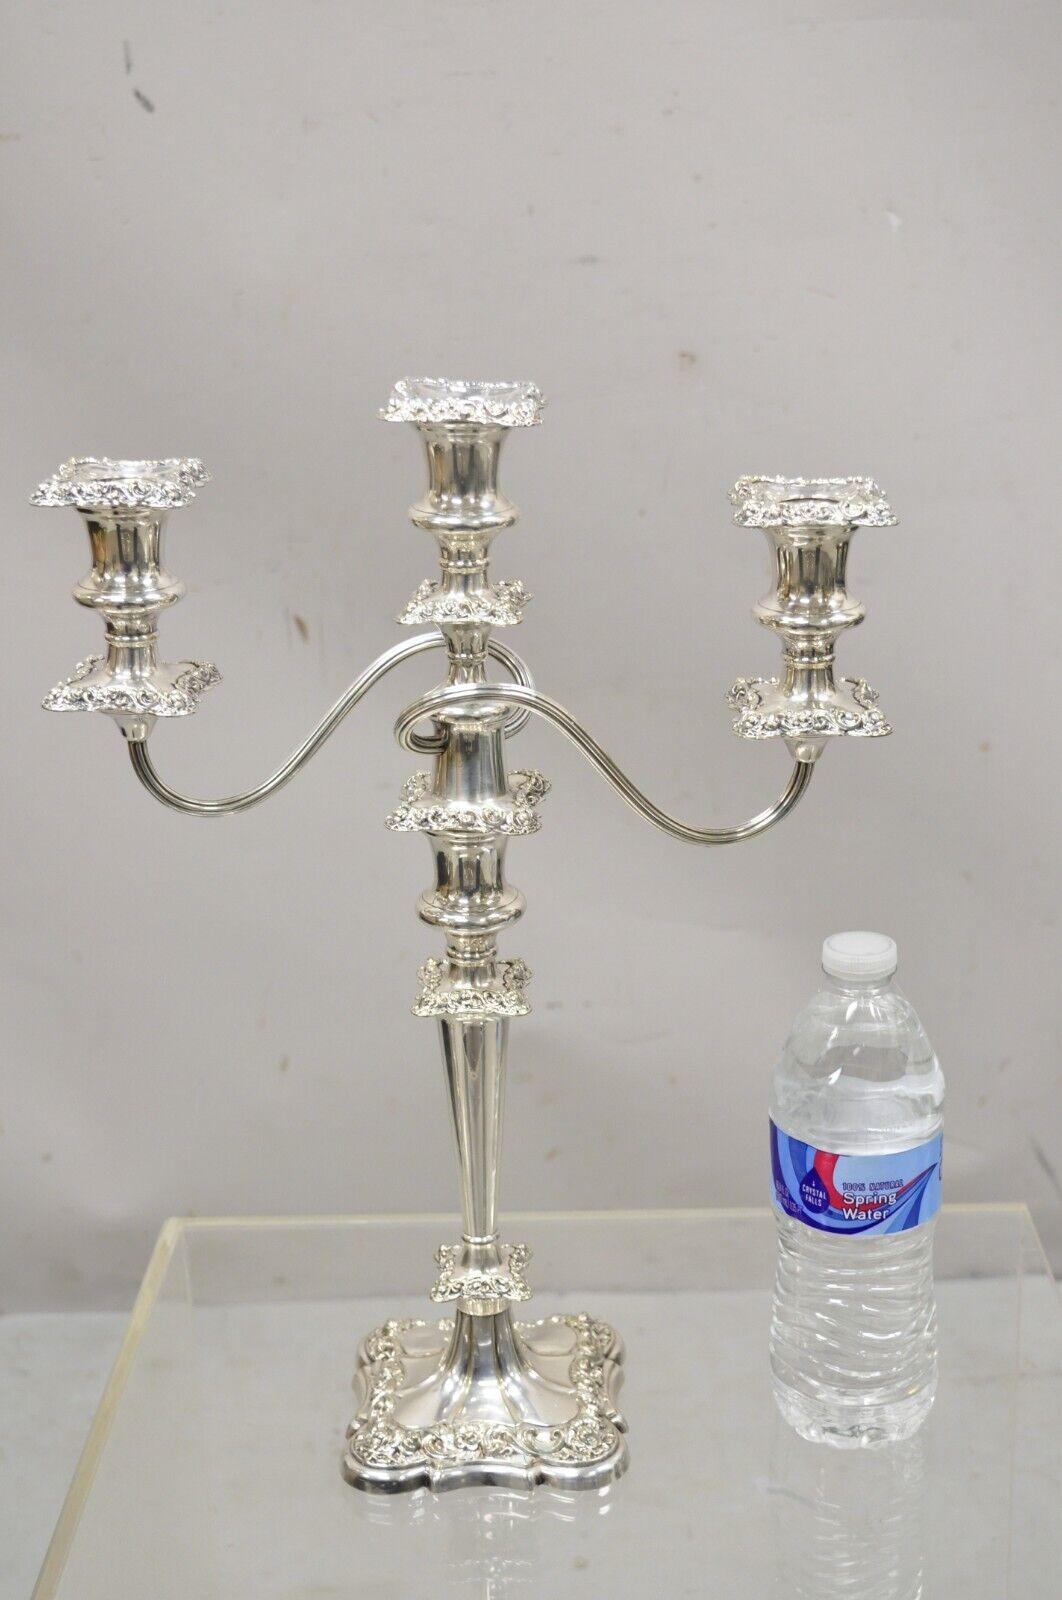 Antique Gorham Floral Repousse Twin Arm Silver Plated Candlestick Candelabra For Sale 5